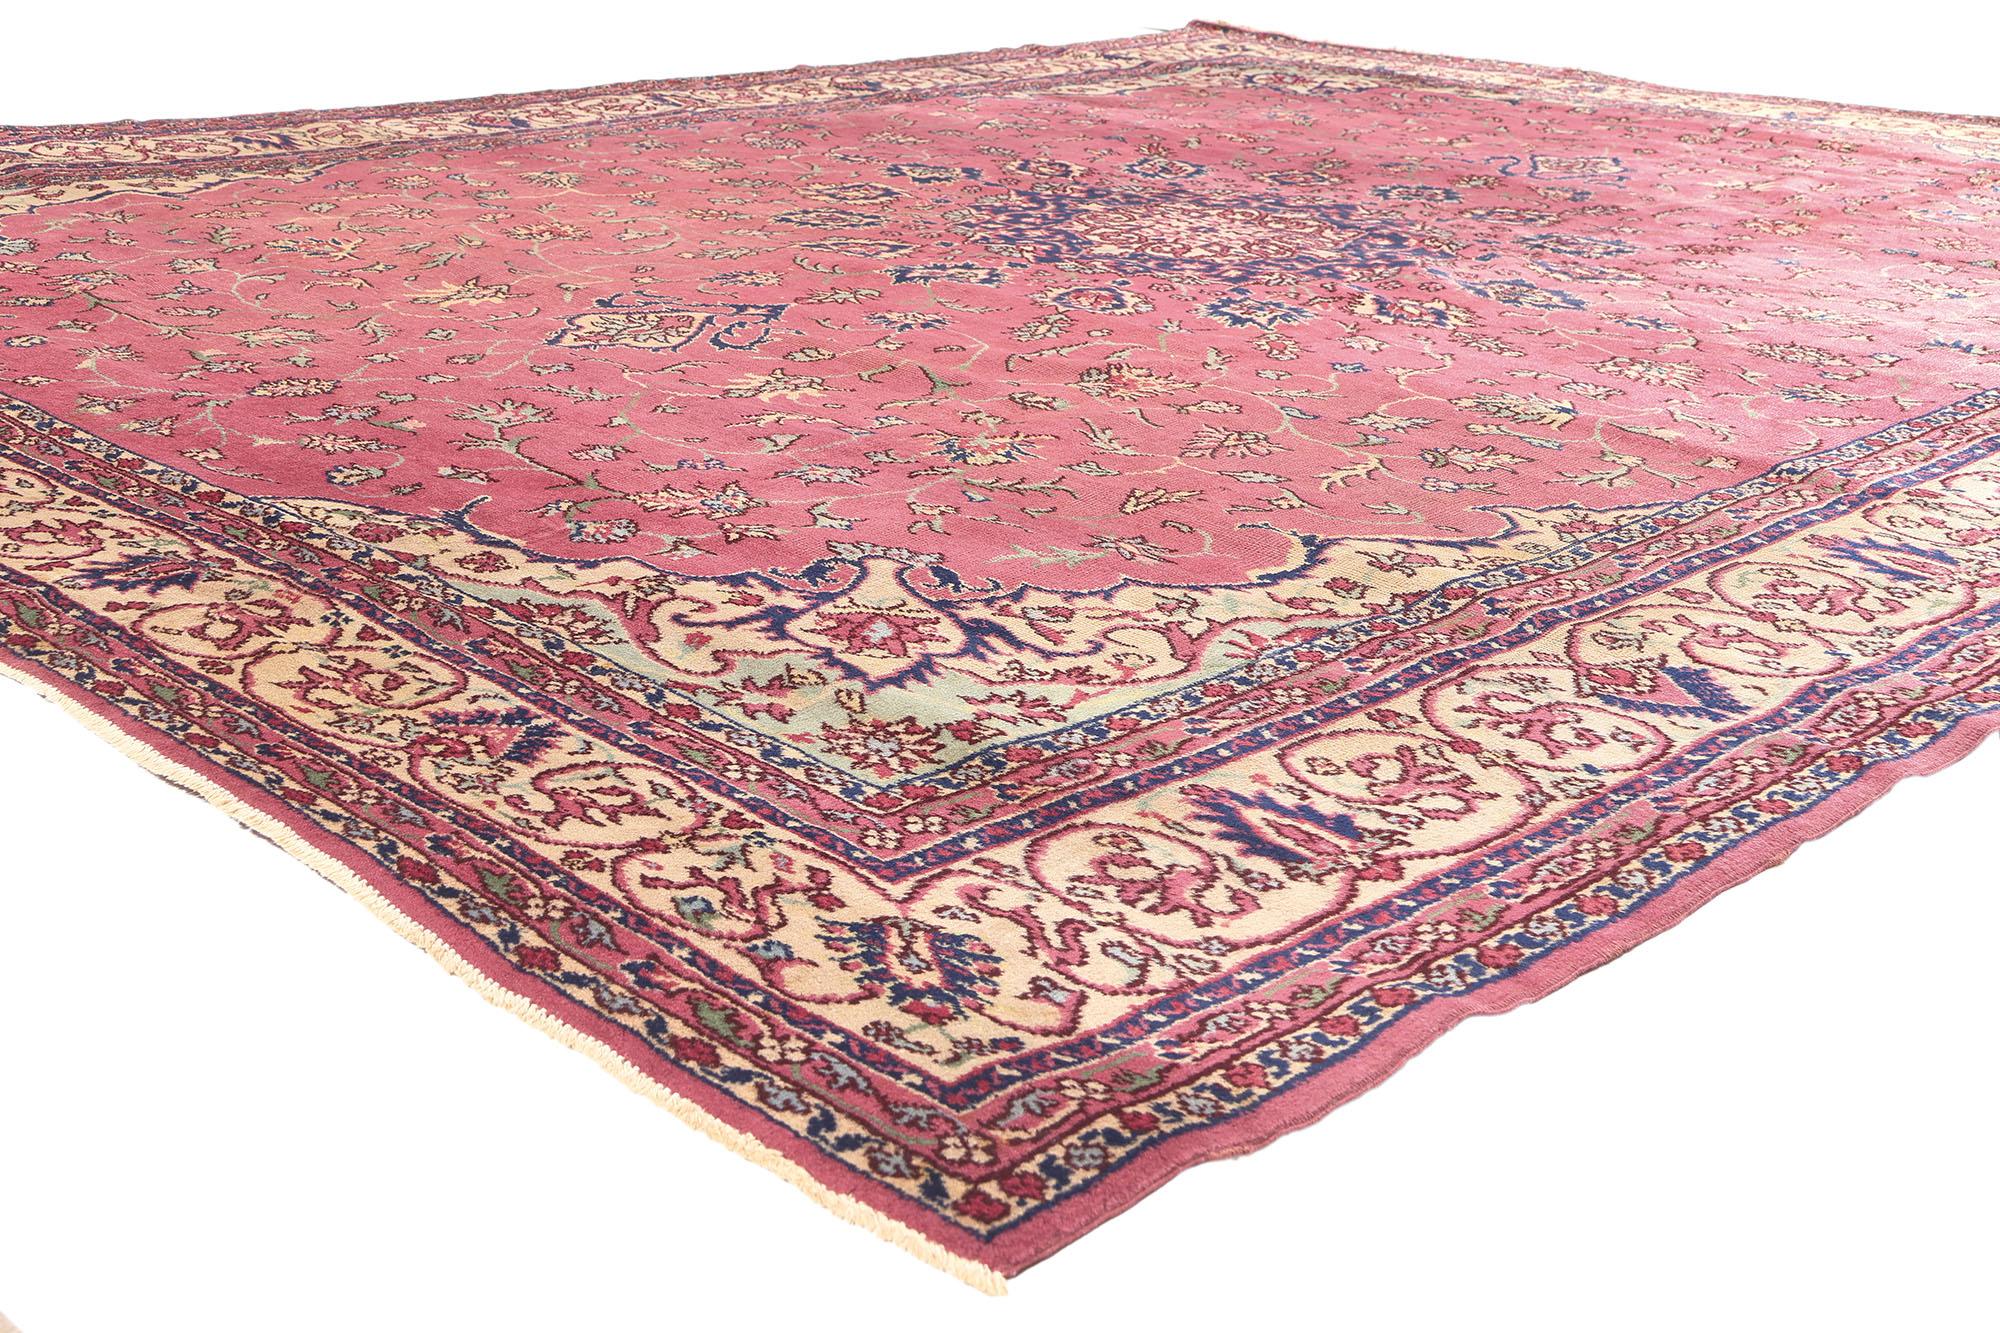 71968 Antique Pink Turkish Sparta Rug, 09'09 x 12'00. In the enchanting town of Sparta, nestled within the southwestern expanse of Turkey, Turkish Sparta rugs spin a captivating tale of heritage and allure. Each intricately crafted Sparta rug